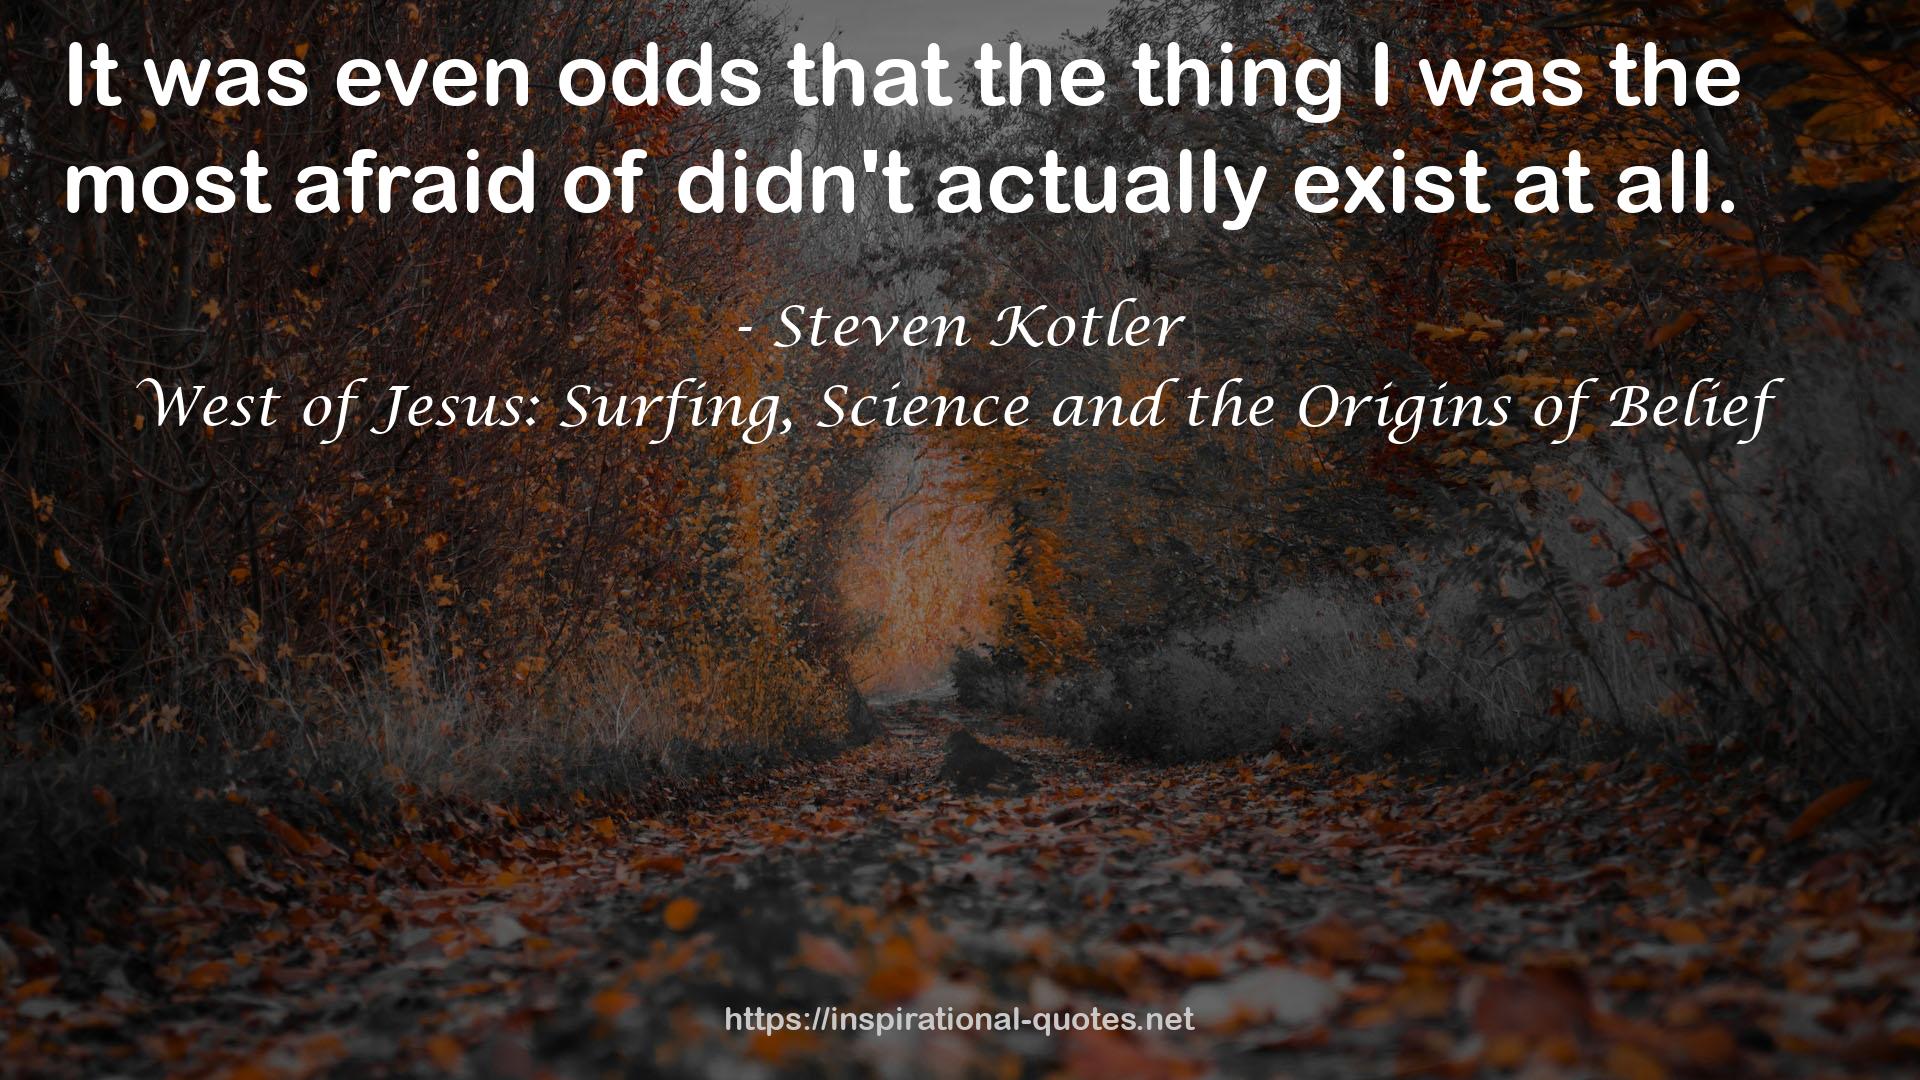 West of Jesus: Surfing, Science and the Origins of Belief QUOTES